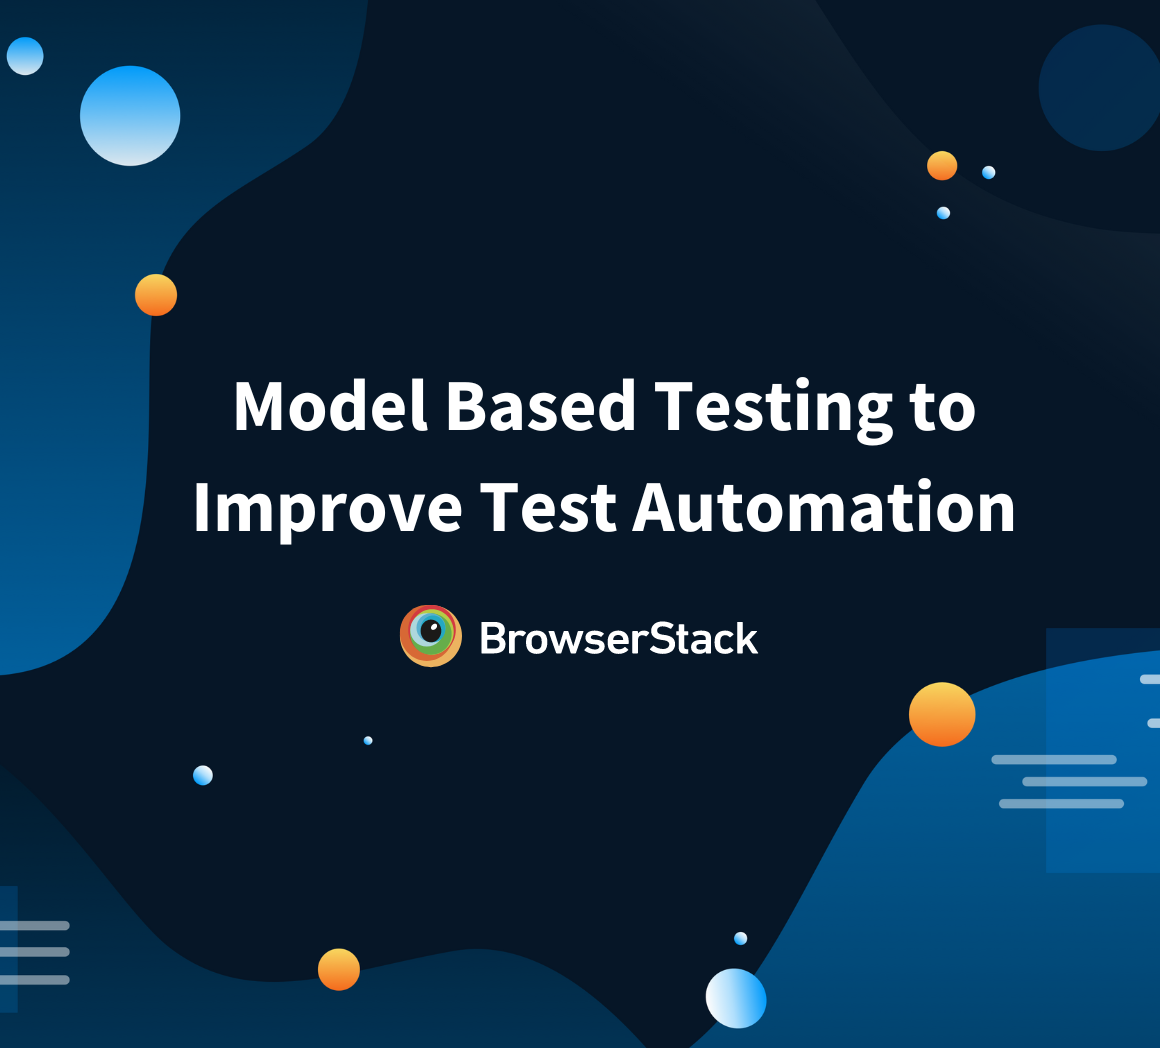 How Does Model Based Testing Improve Test Automation?